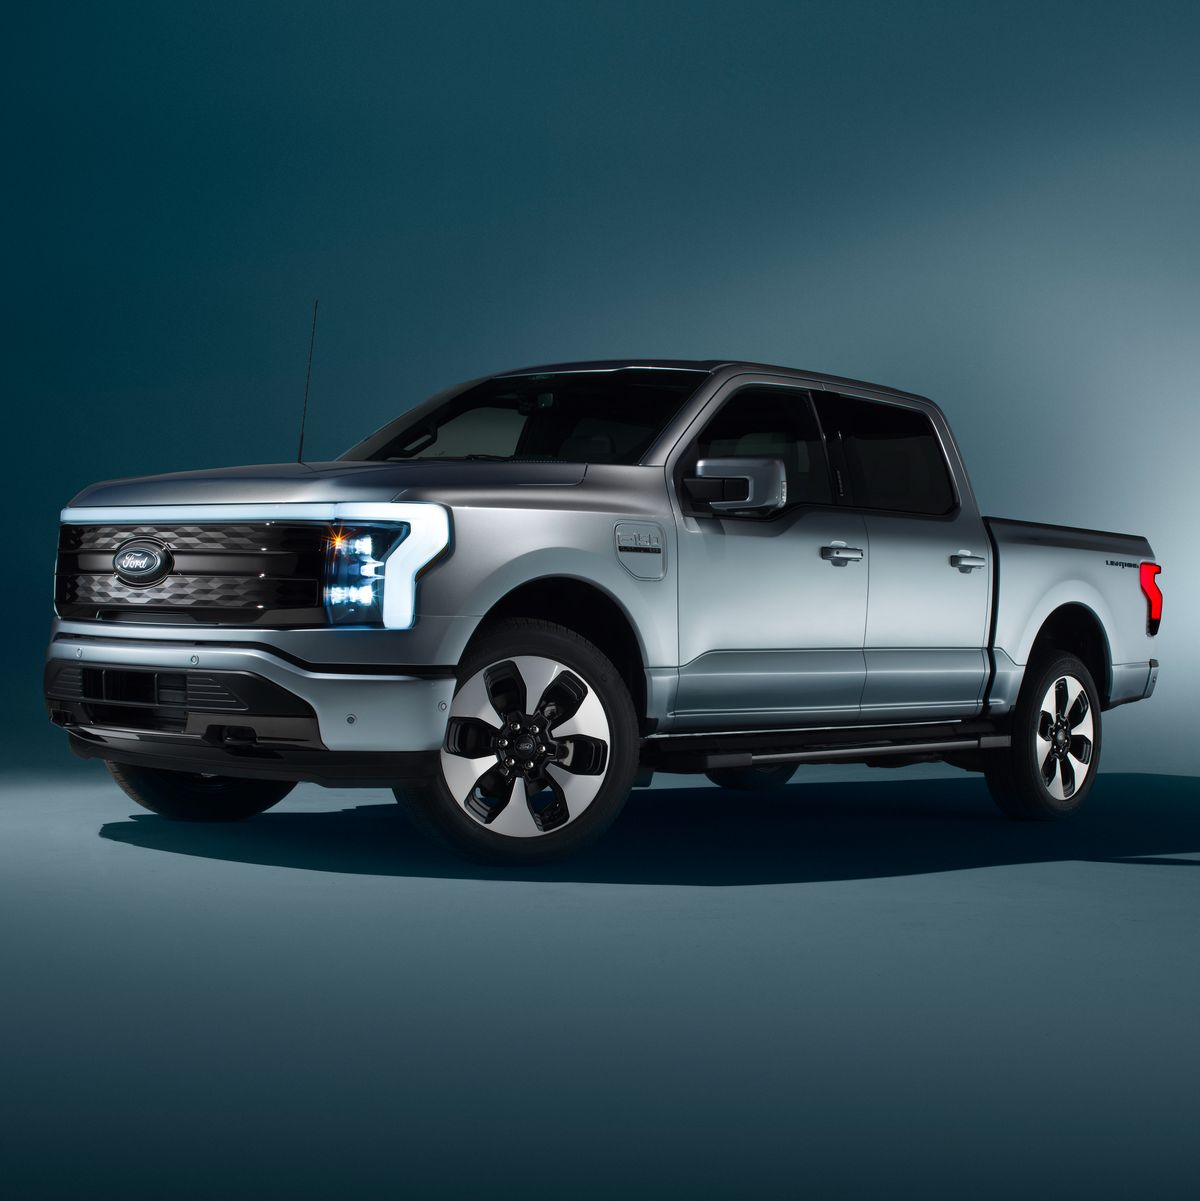 563-HP 2022 Ford F-150 Lightning Turns America's Top Seller Electric